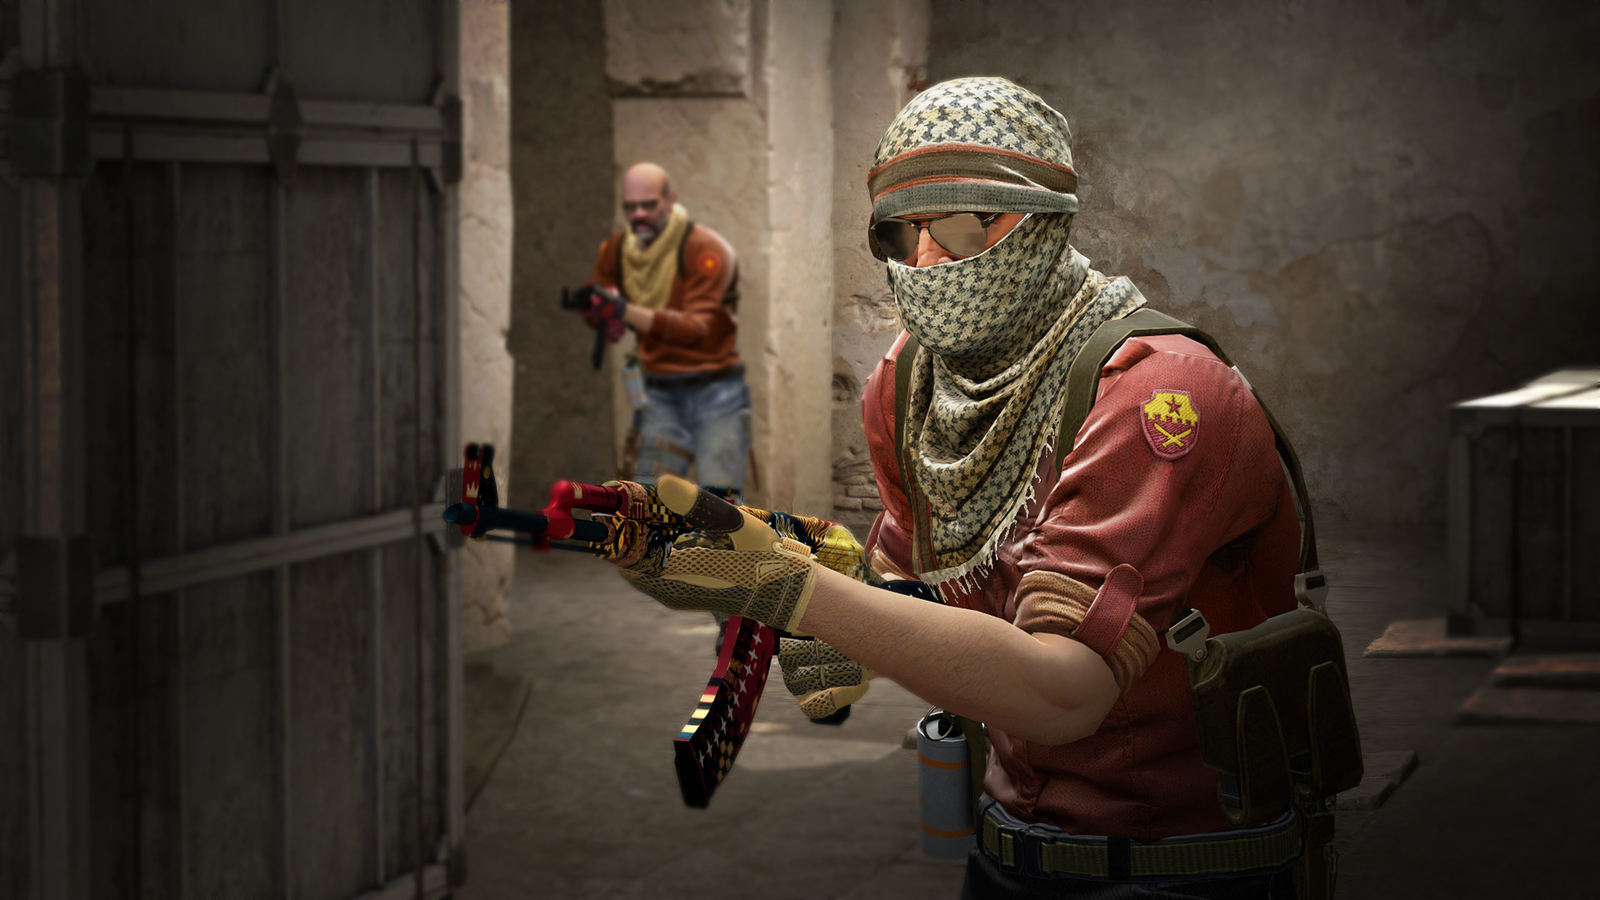 Counter-Strike: Global Offensive, Valve, PC gaming, weapon HD Wallpaper